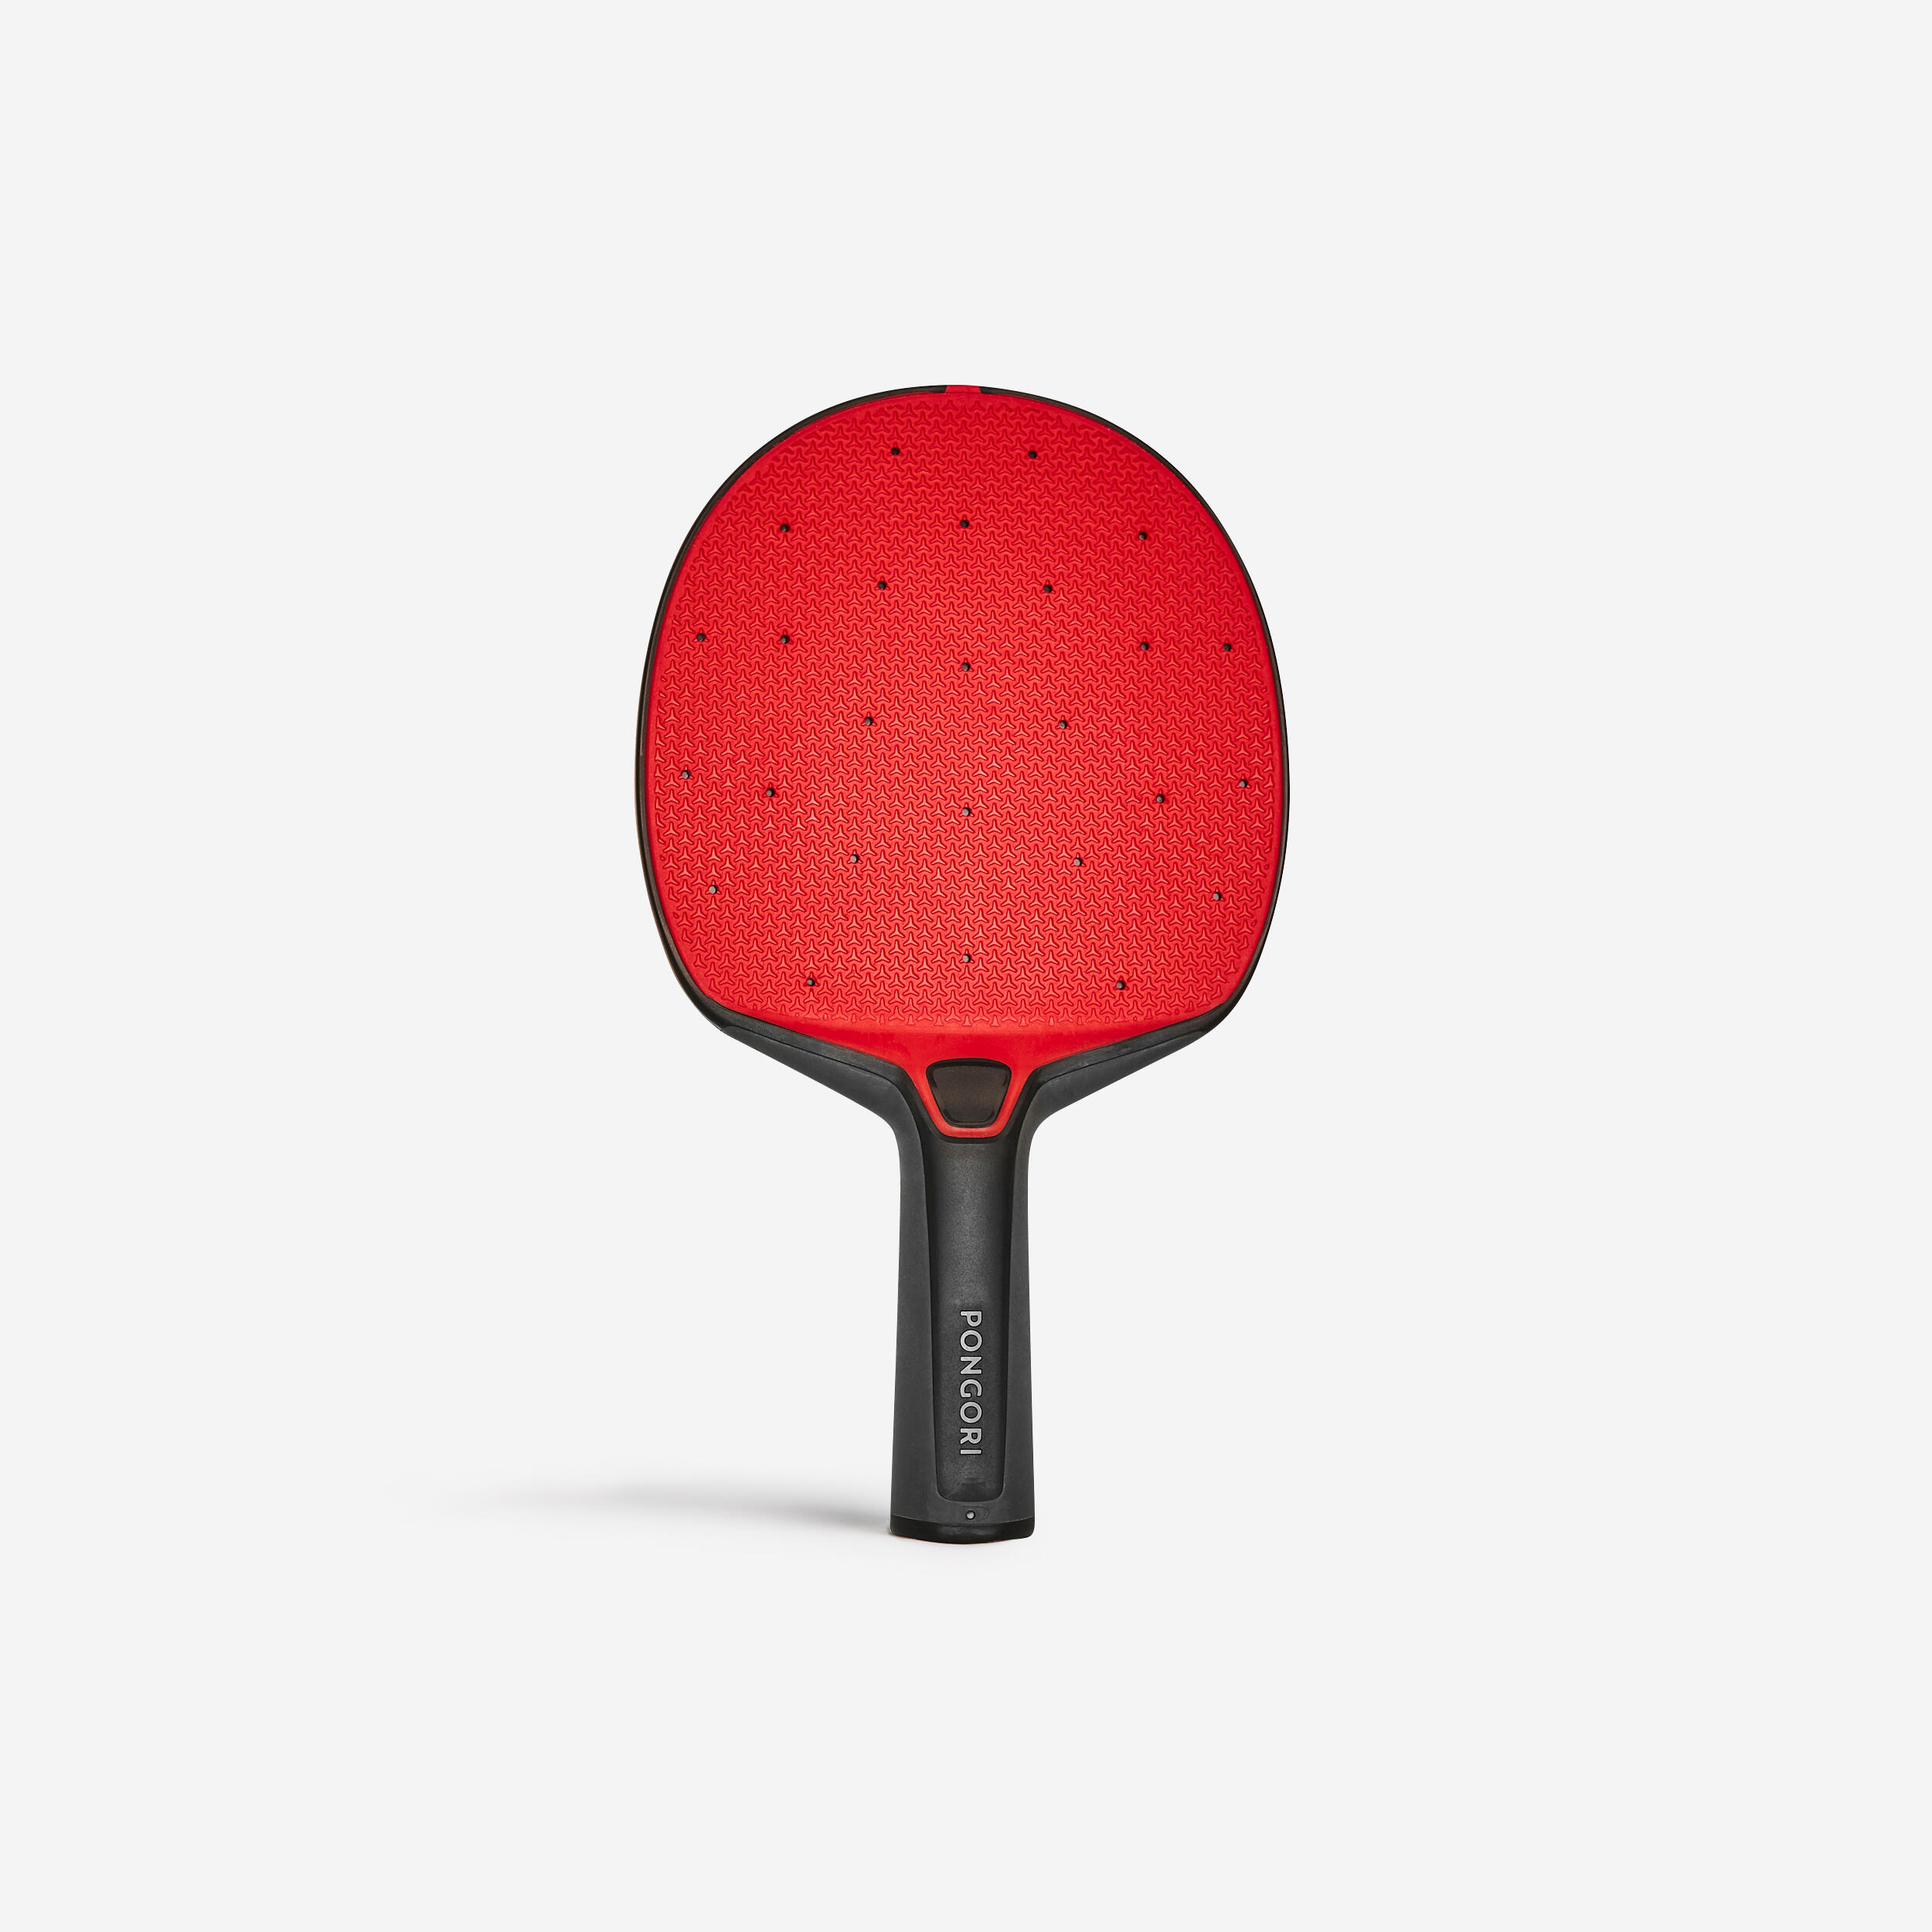 Image of PPR 130 outdoor table tennis paddle